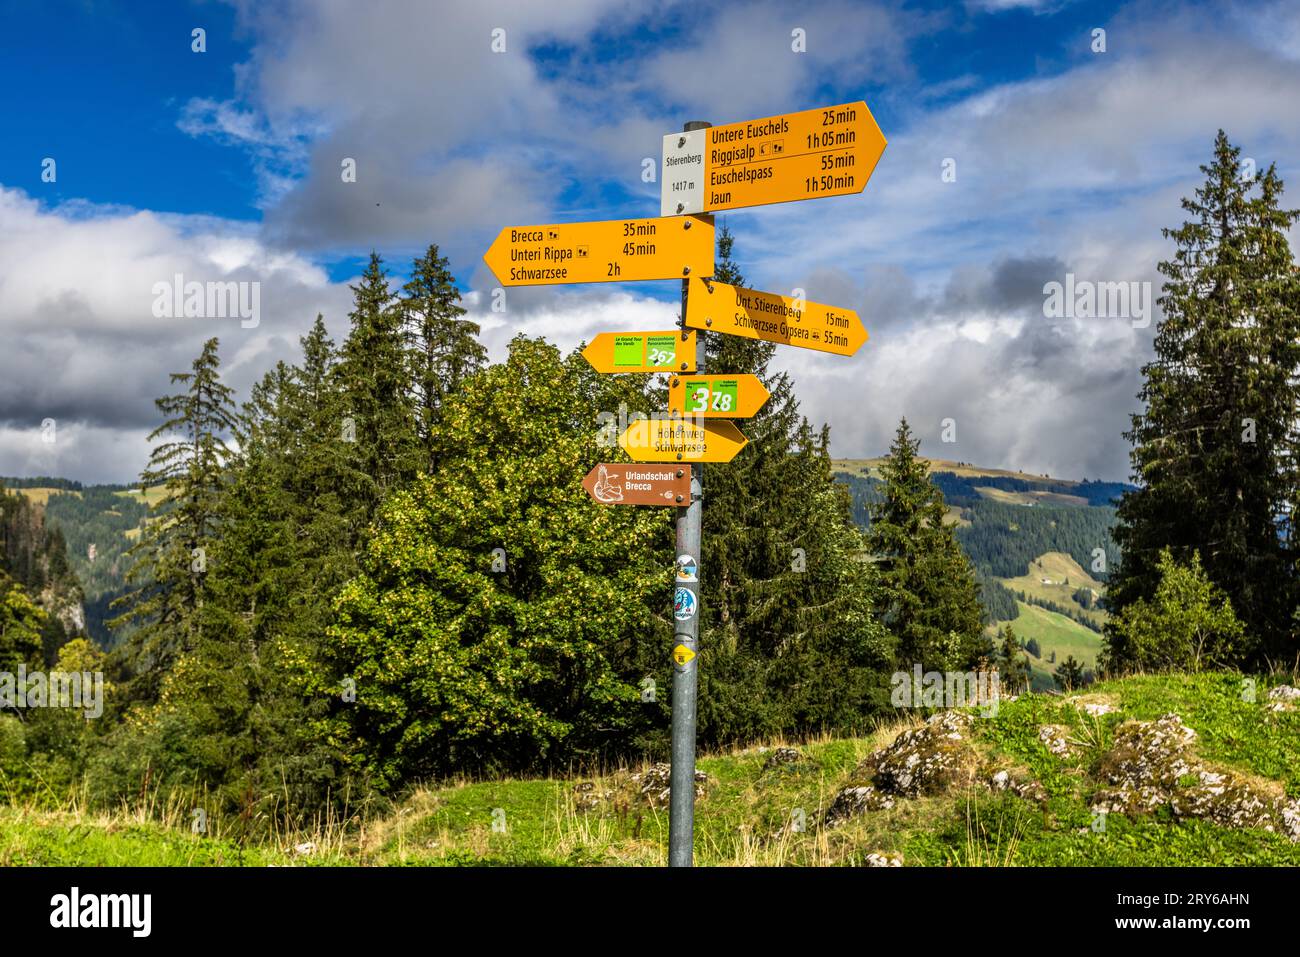 The primeval landscape of Brecca is a varied hiking area. Jaun, Switzerland Stock Photo